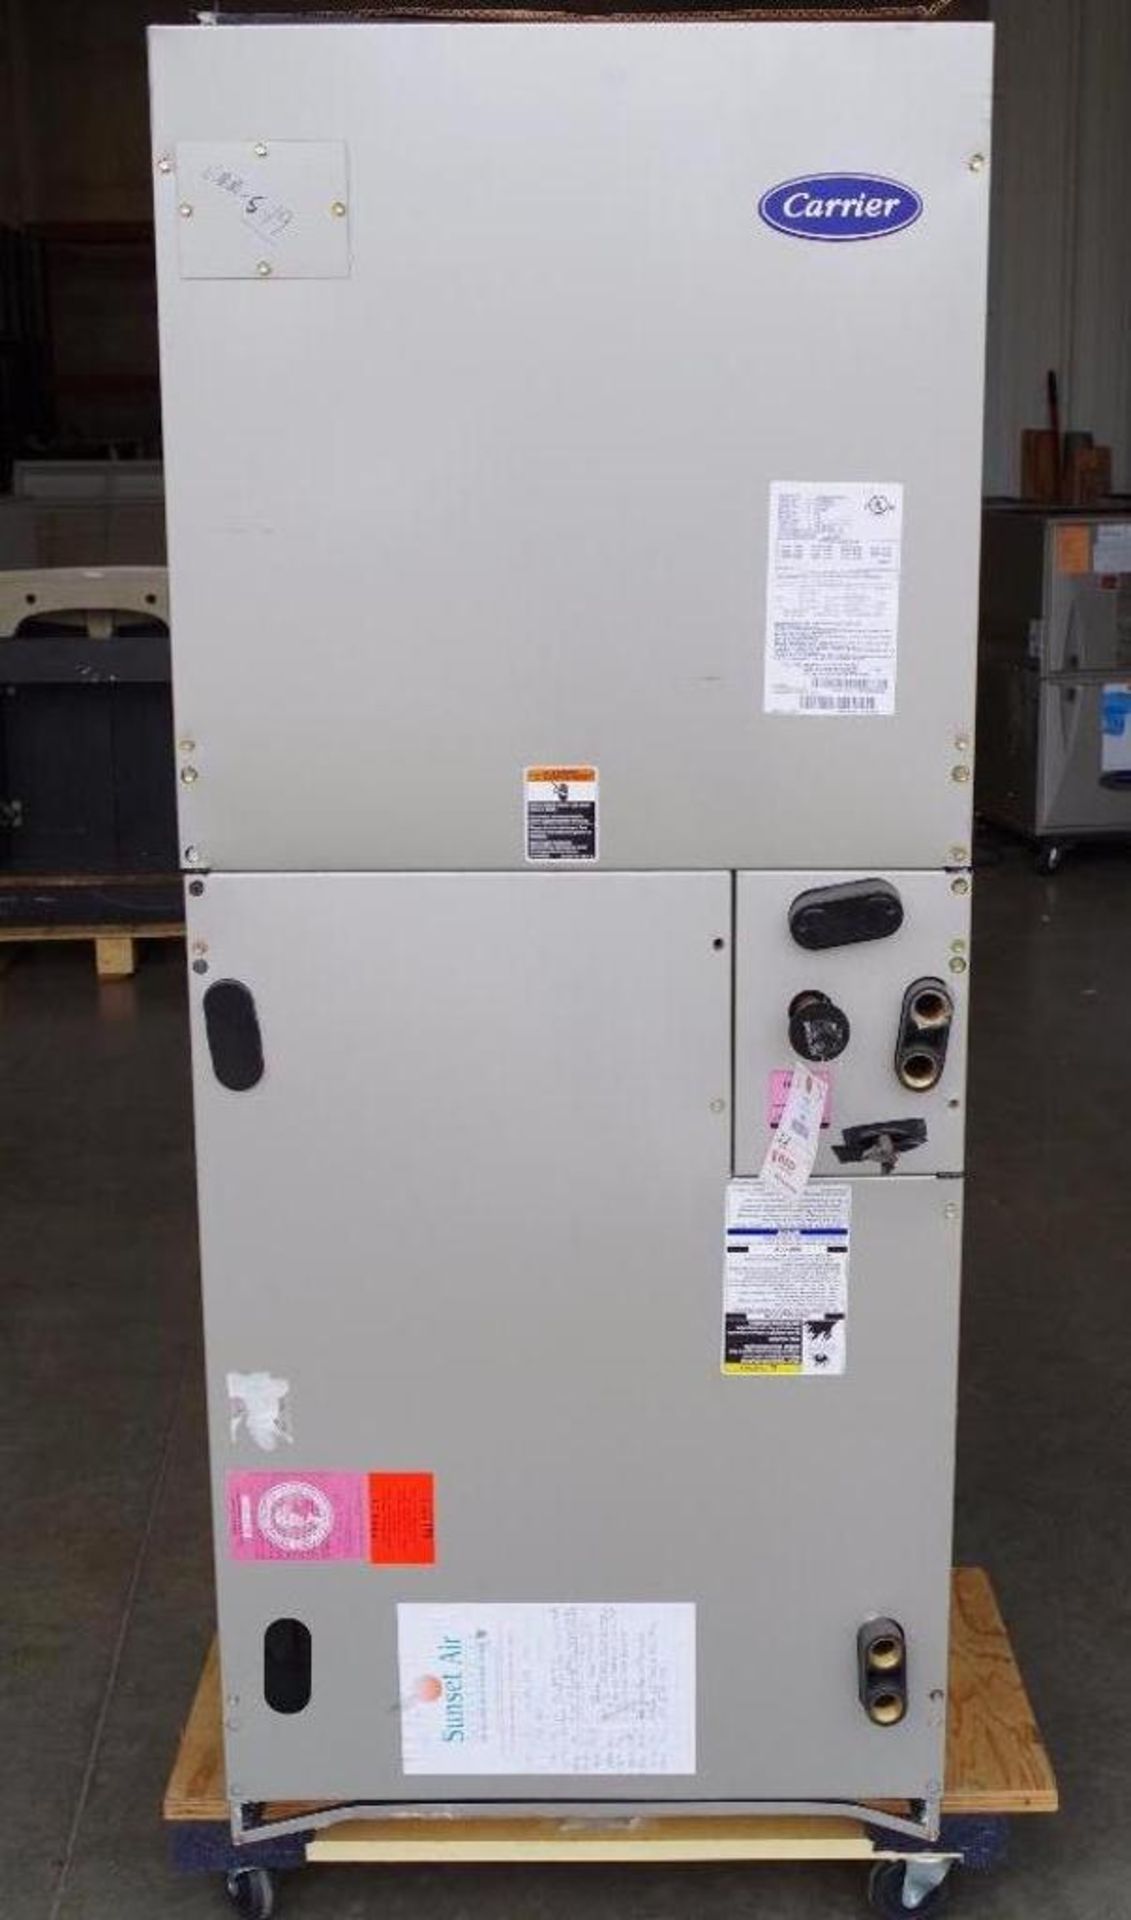 BRYANT Central Air Conditioner M/N FE4ANB006 (see label for additional information)